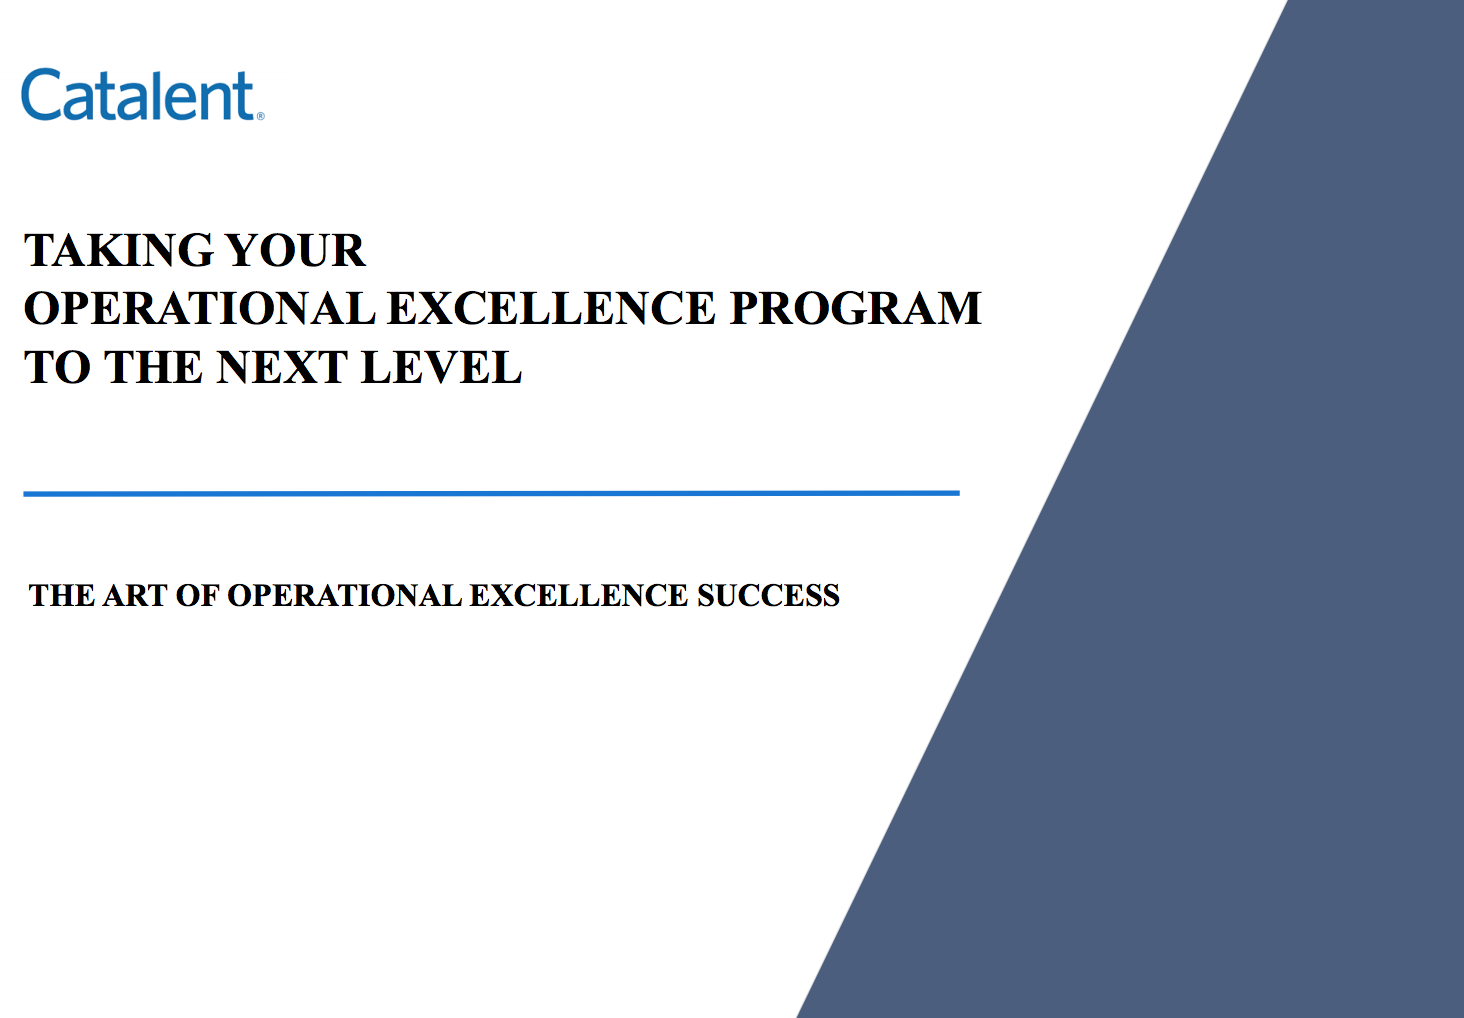 Taking your Operational Excellence Program to the Next Level